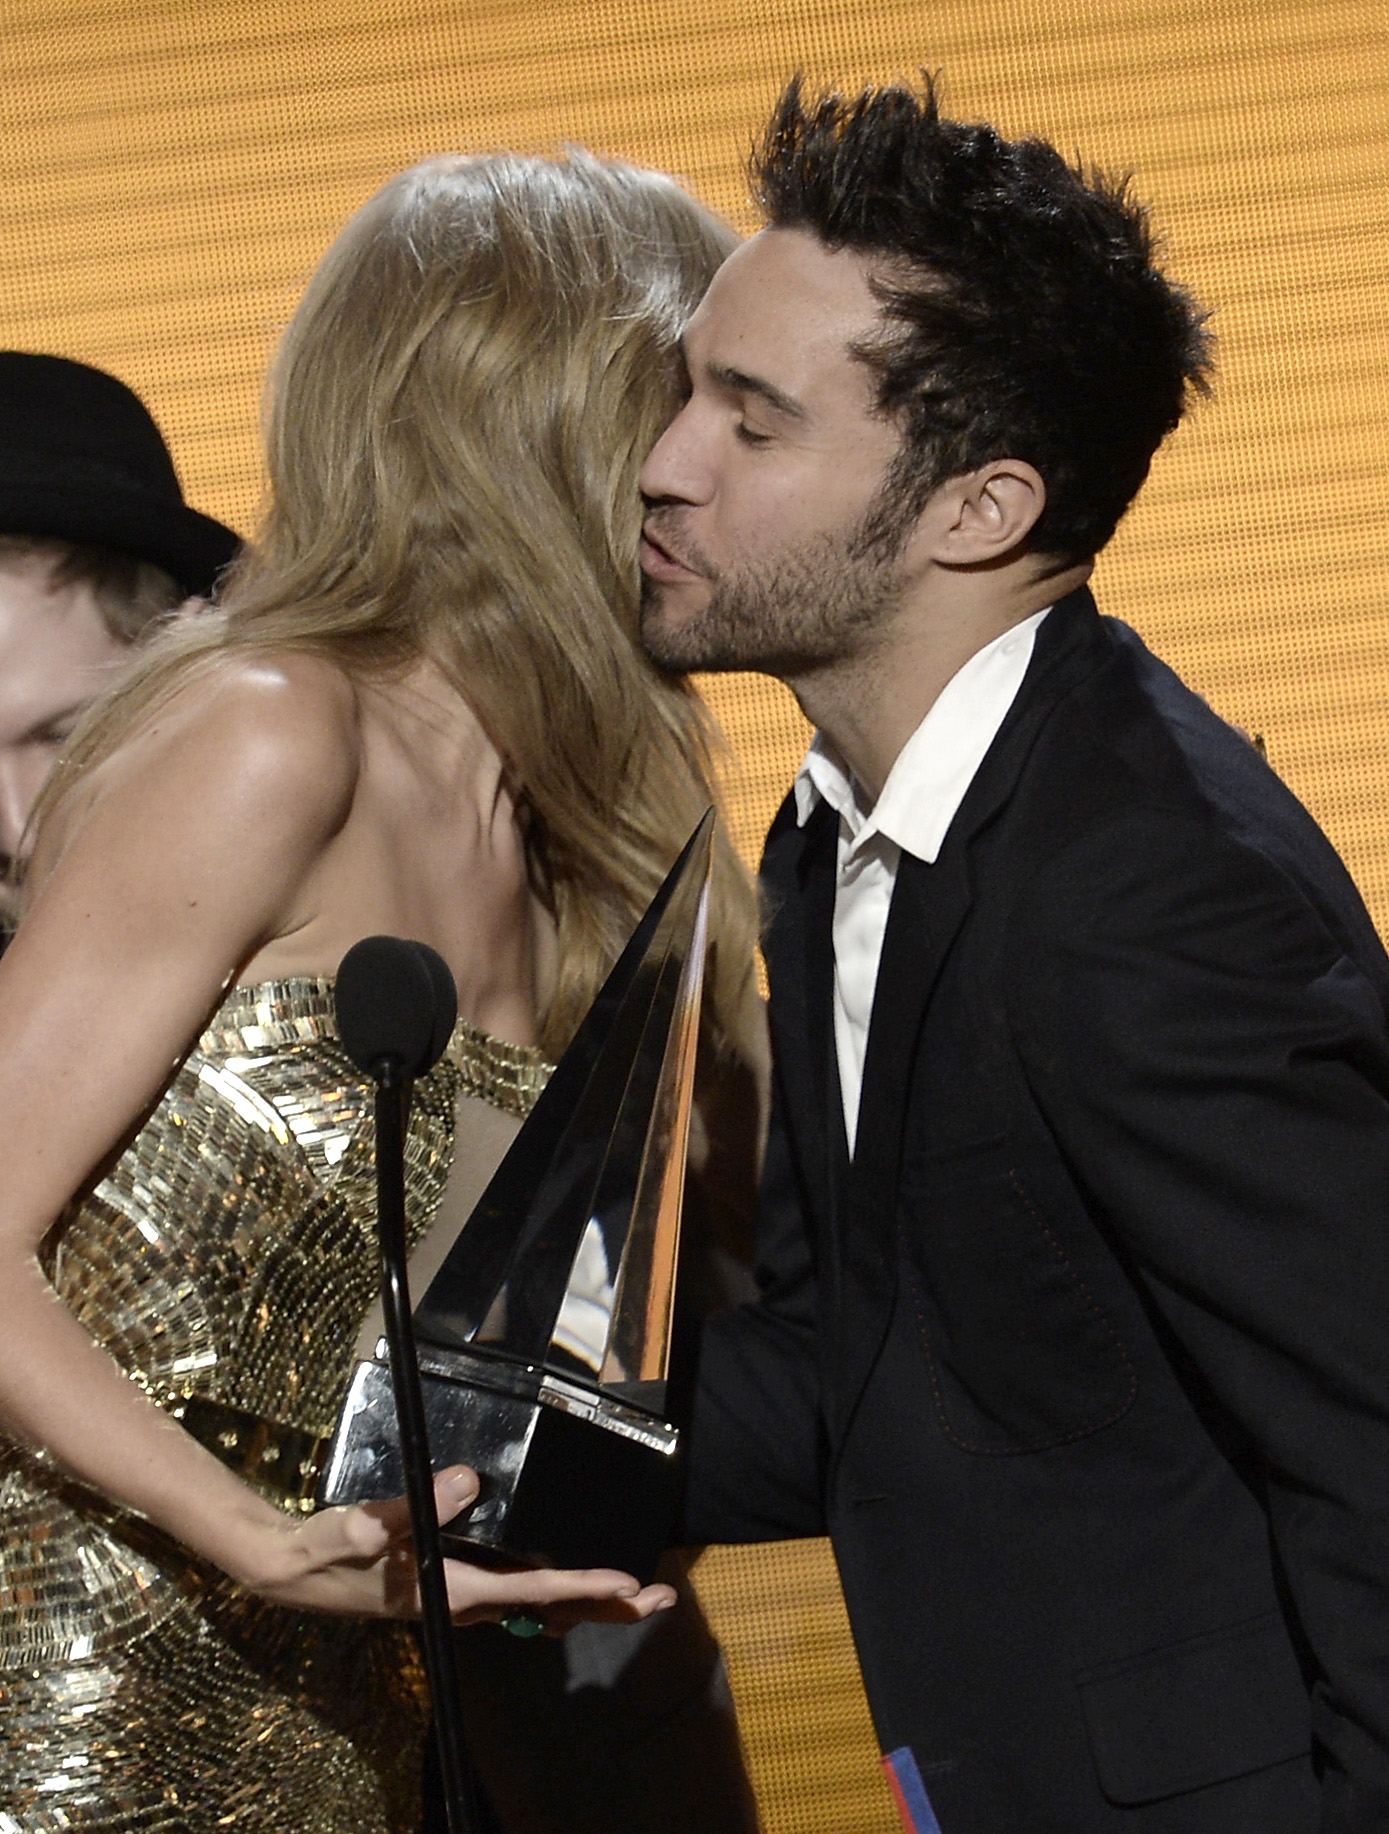 http://taylorpictures.net/albums/app/2013/americanmusicawards/109.jpg